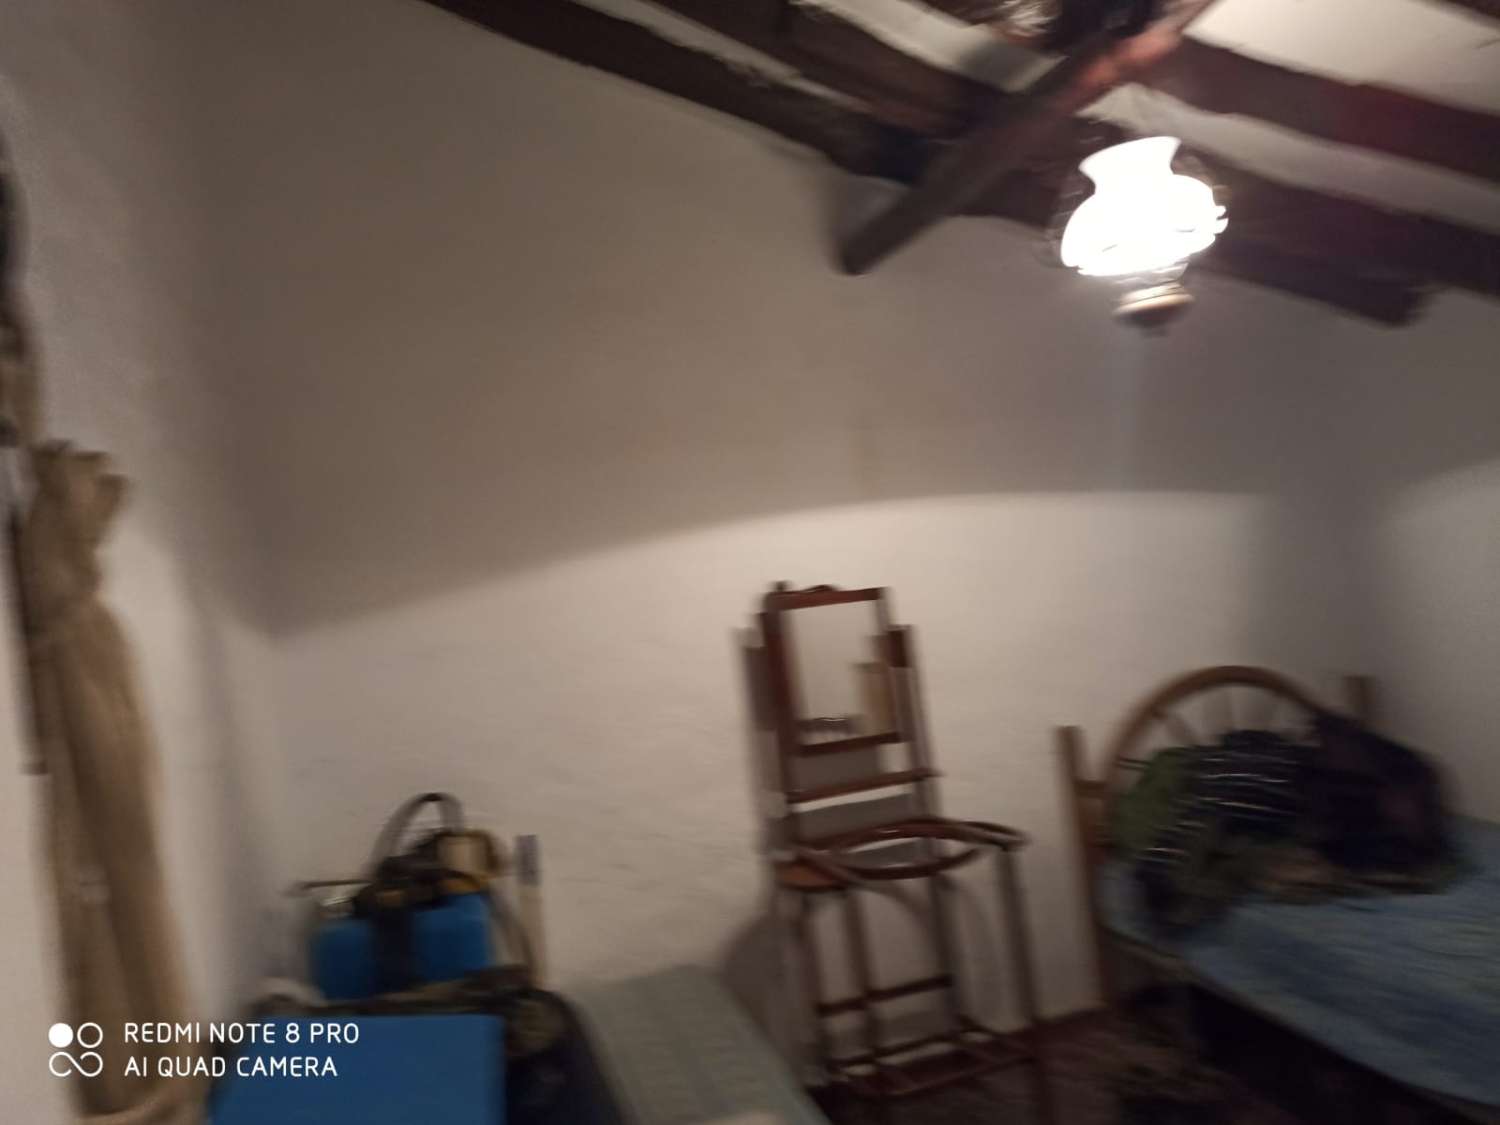 Country house in casabermeja to reform